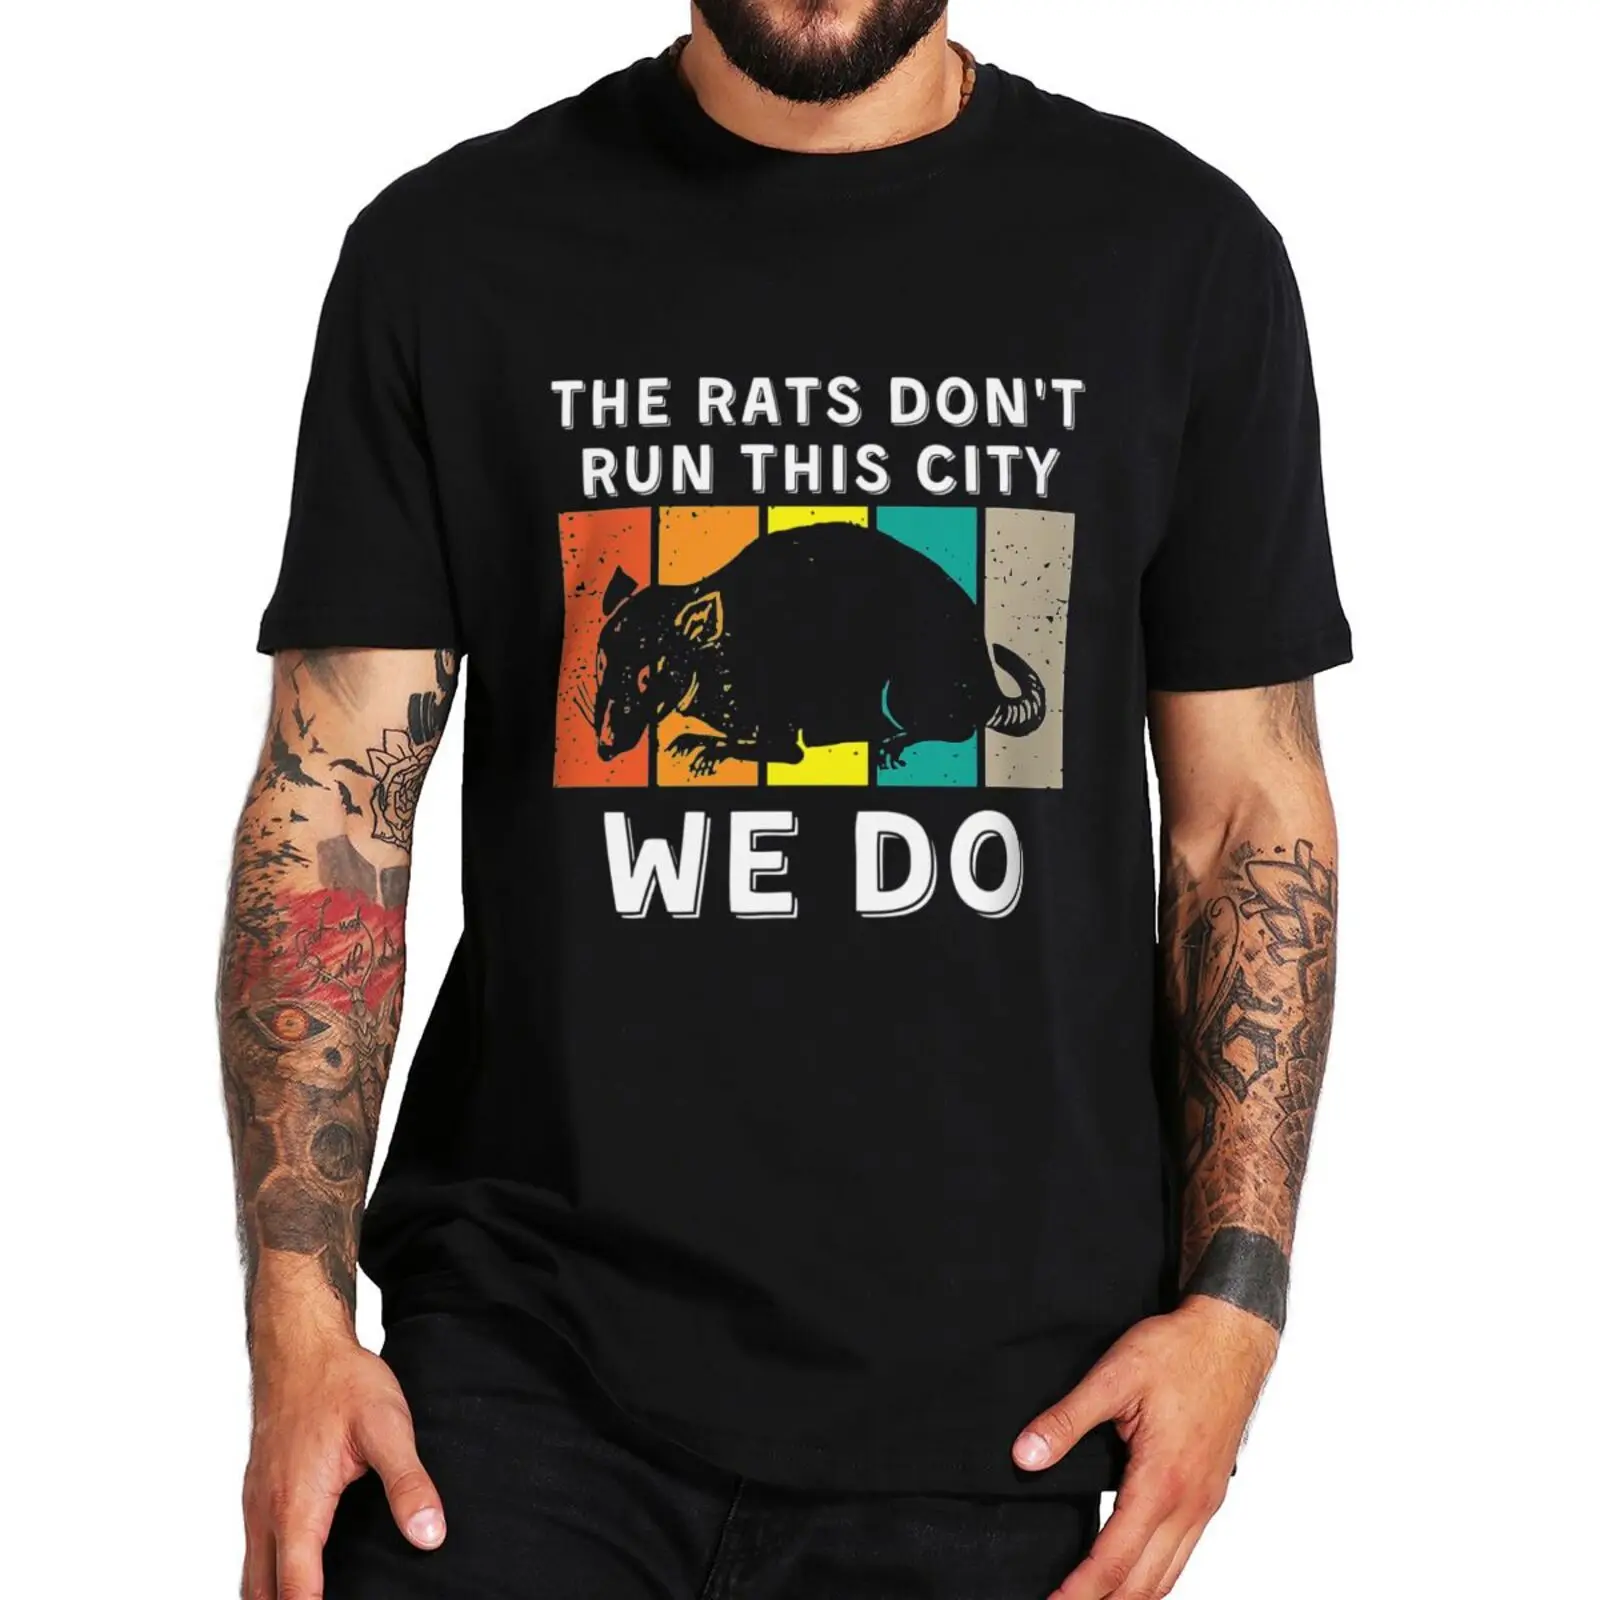 

The Rats Don't Run This City We Do T Shirt Funny Meme Humor Vintage Tee Tops High Quality 100% Cotton Unisex Soft O-neck T-shirt